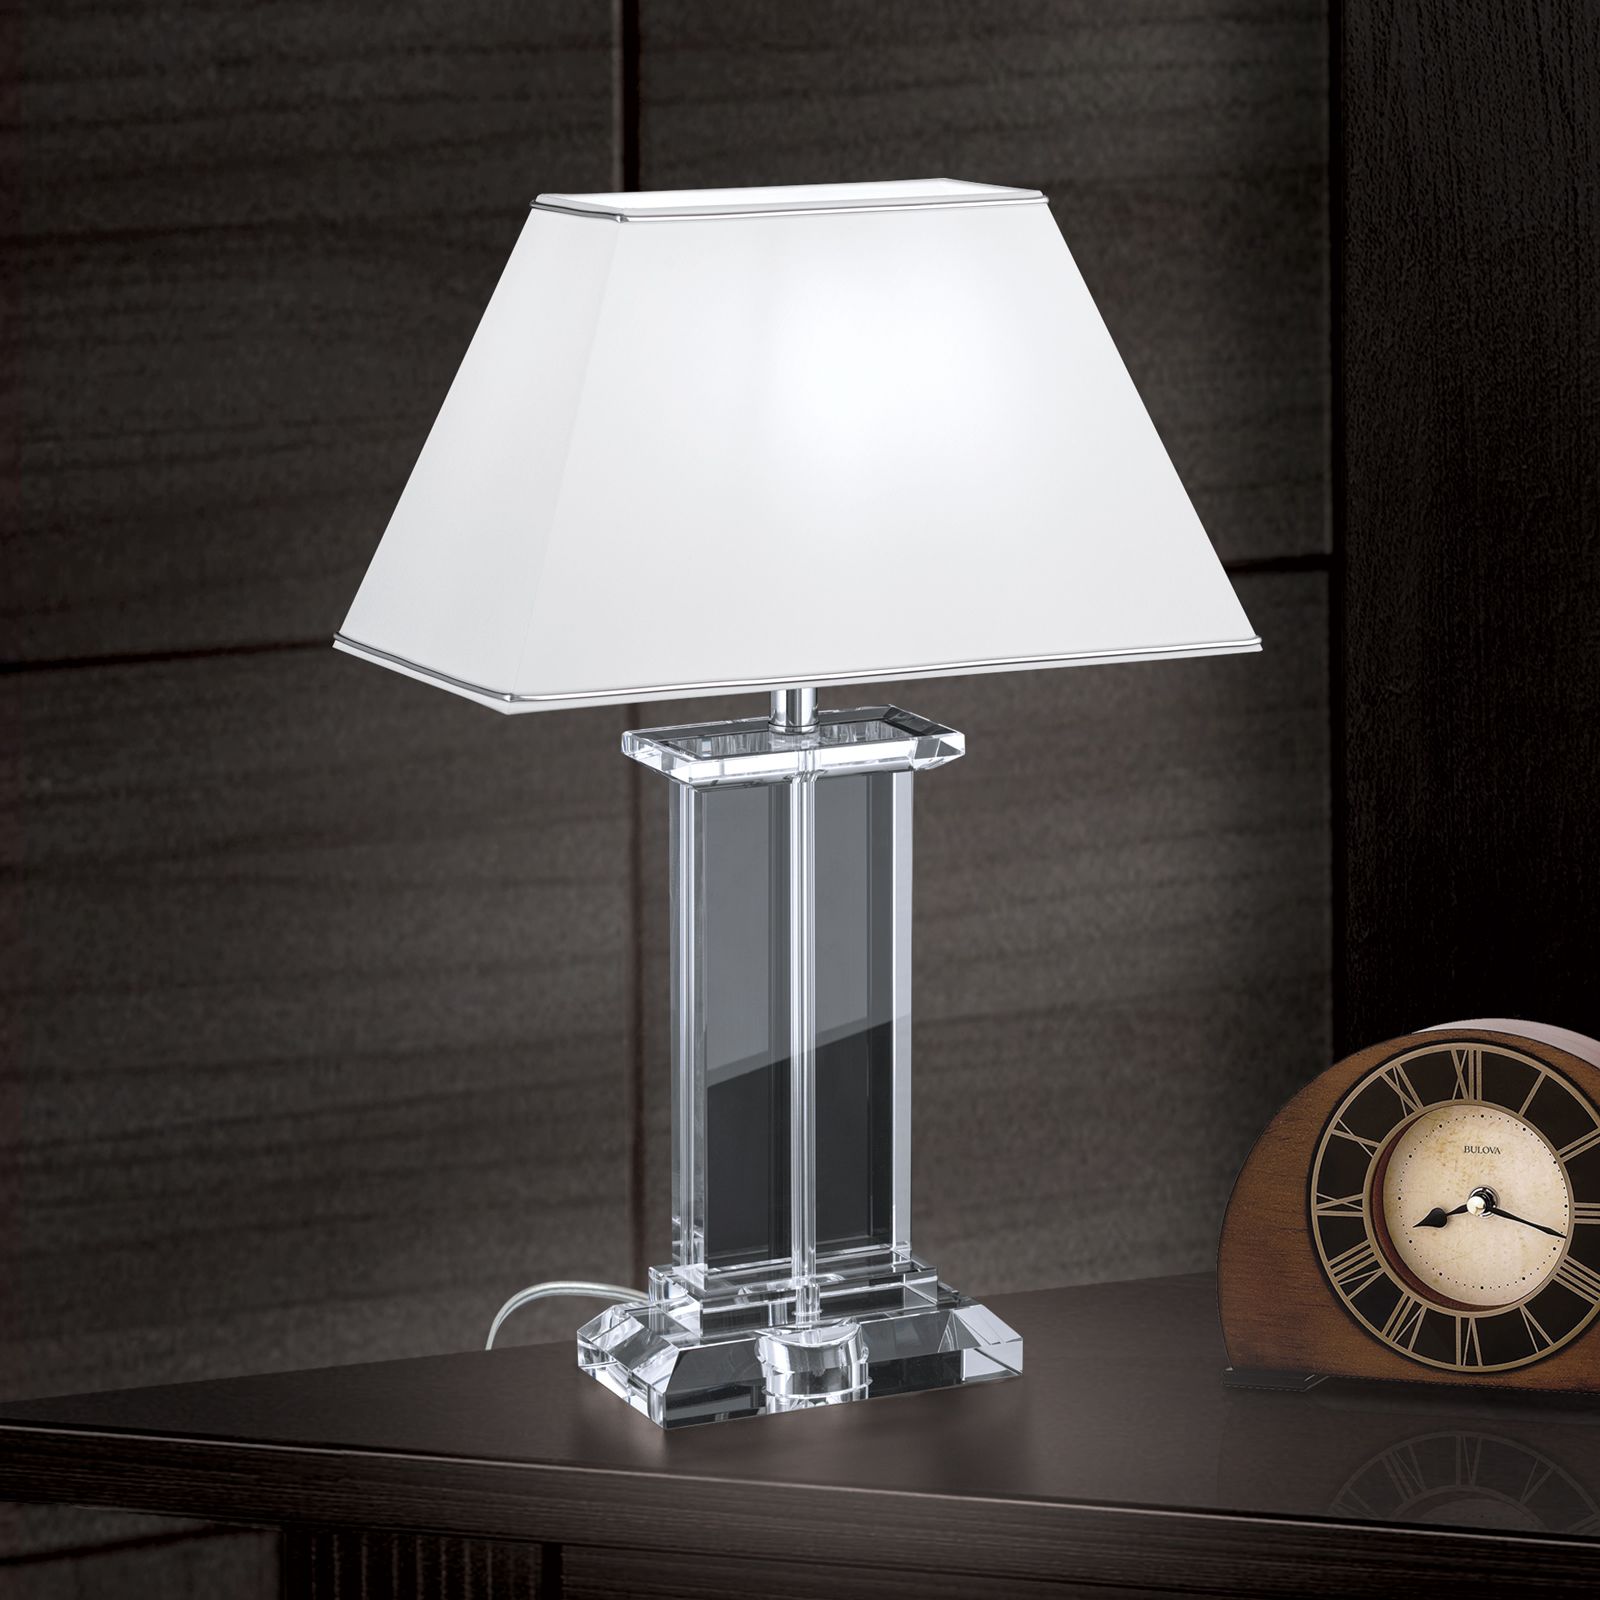 Smart table lamp brass with green glass incl. WiFi P45 - Banker